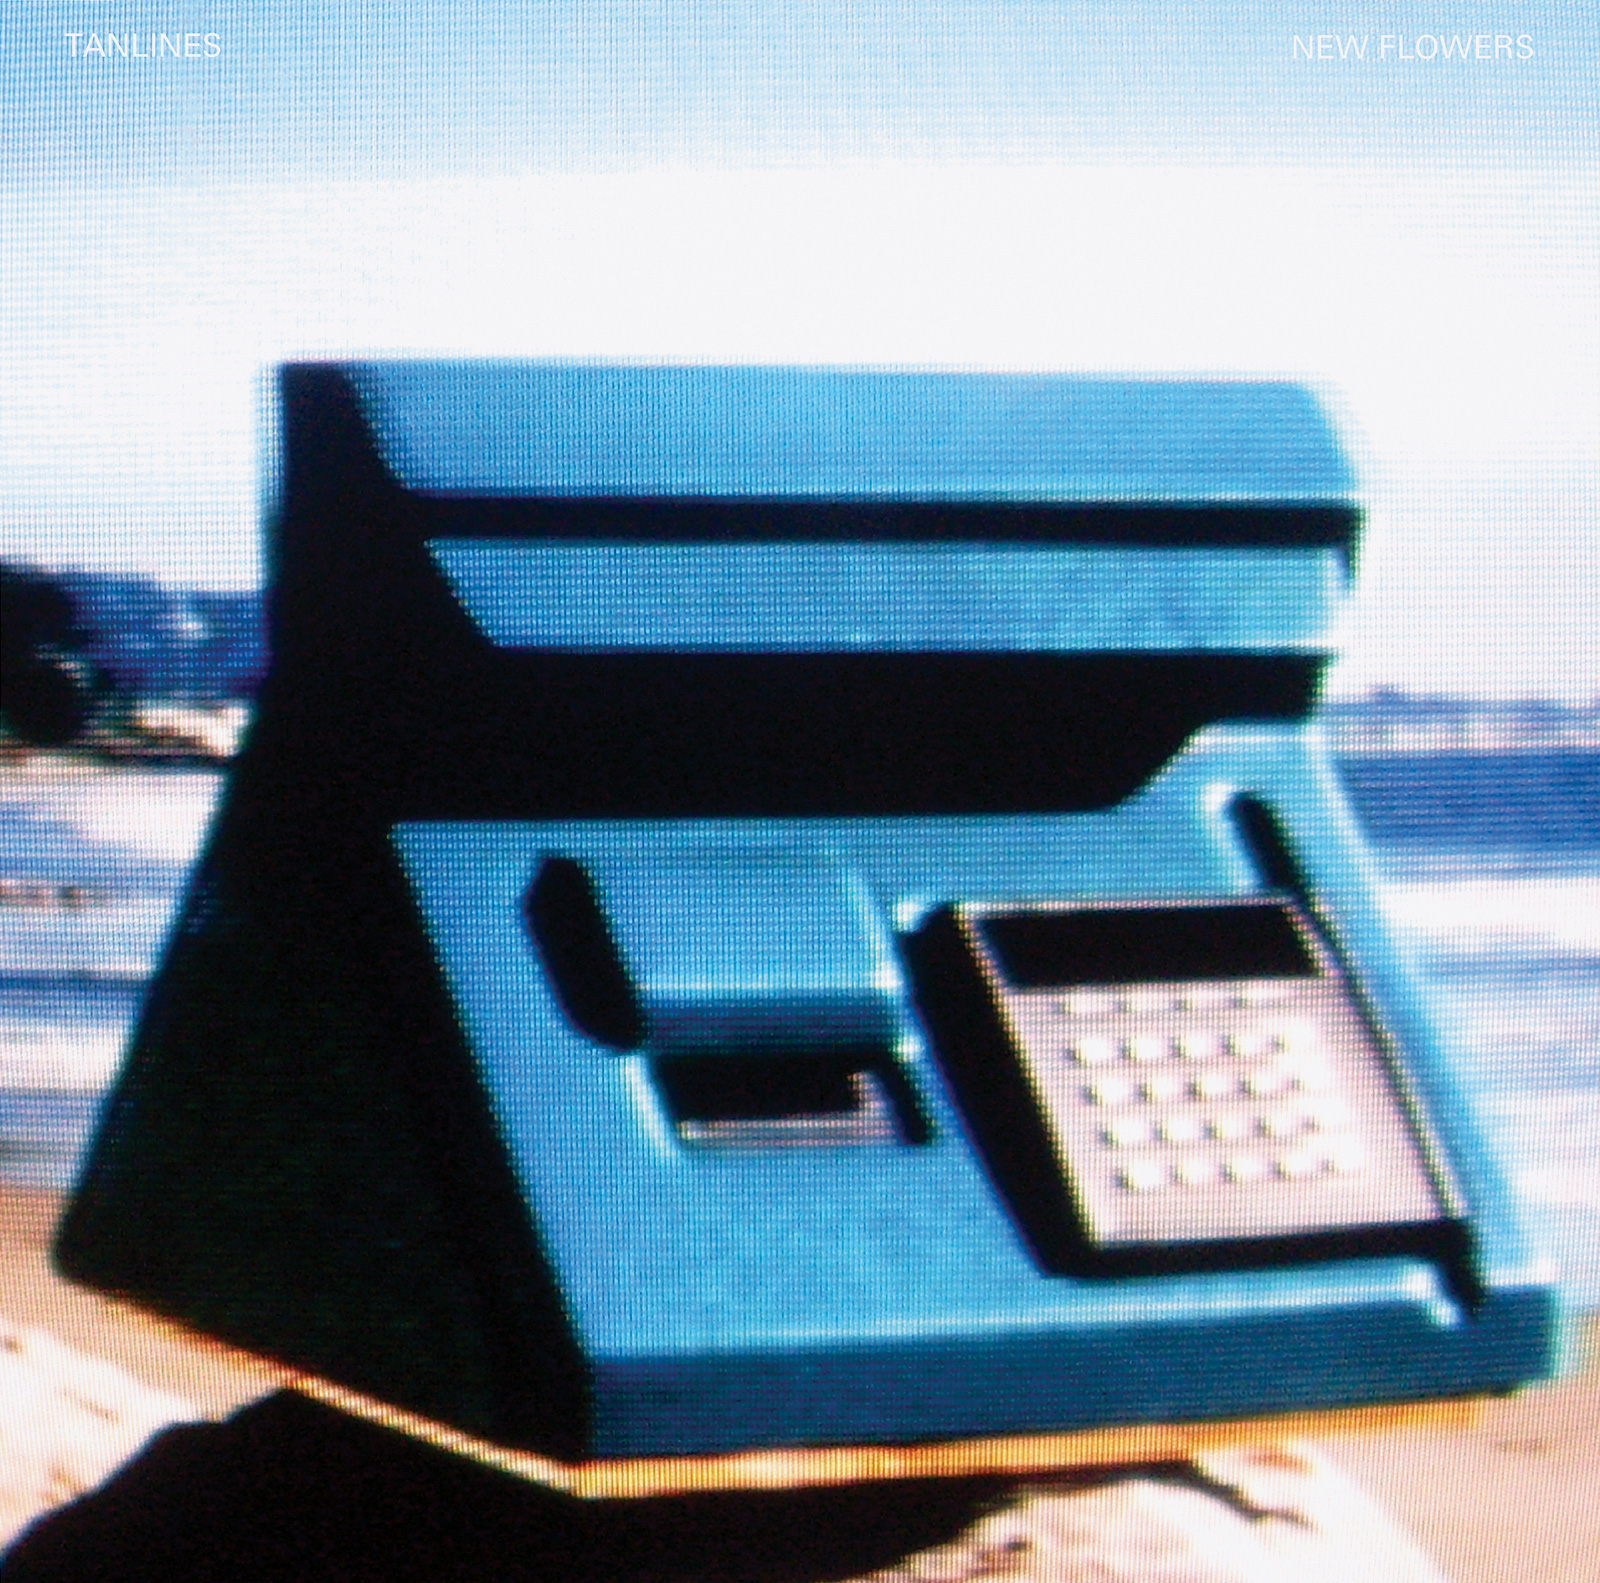 tanlines-new_flowers-front_cover